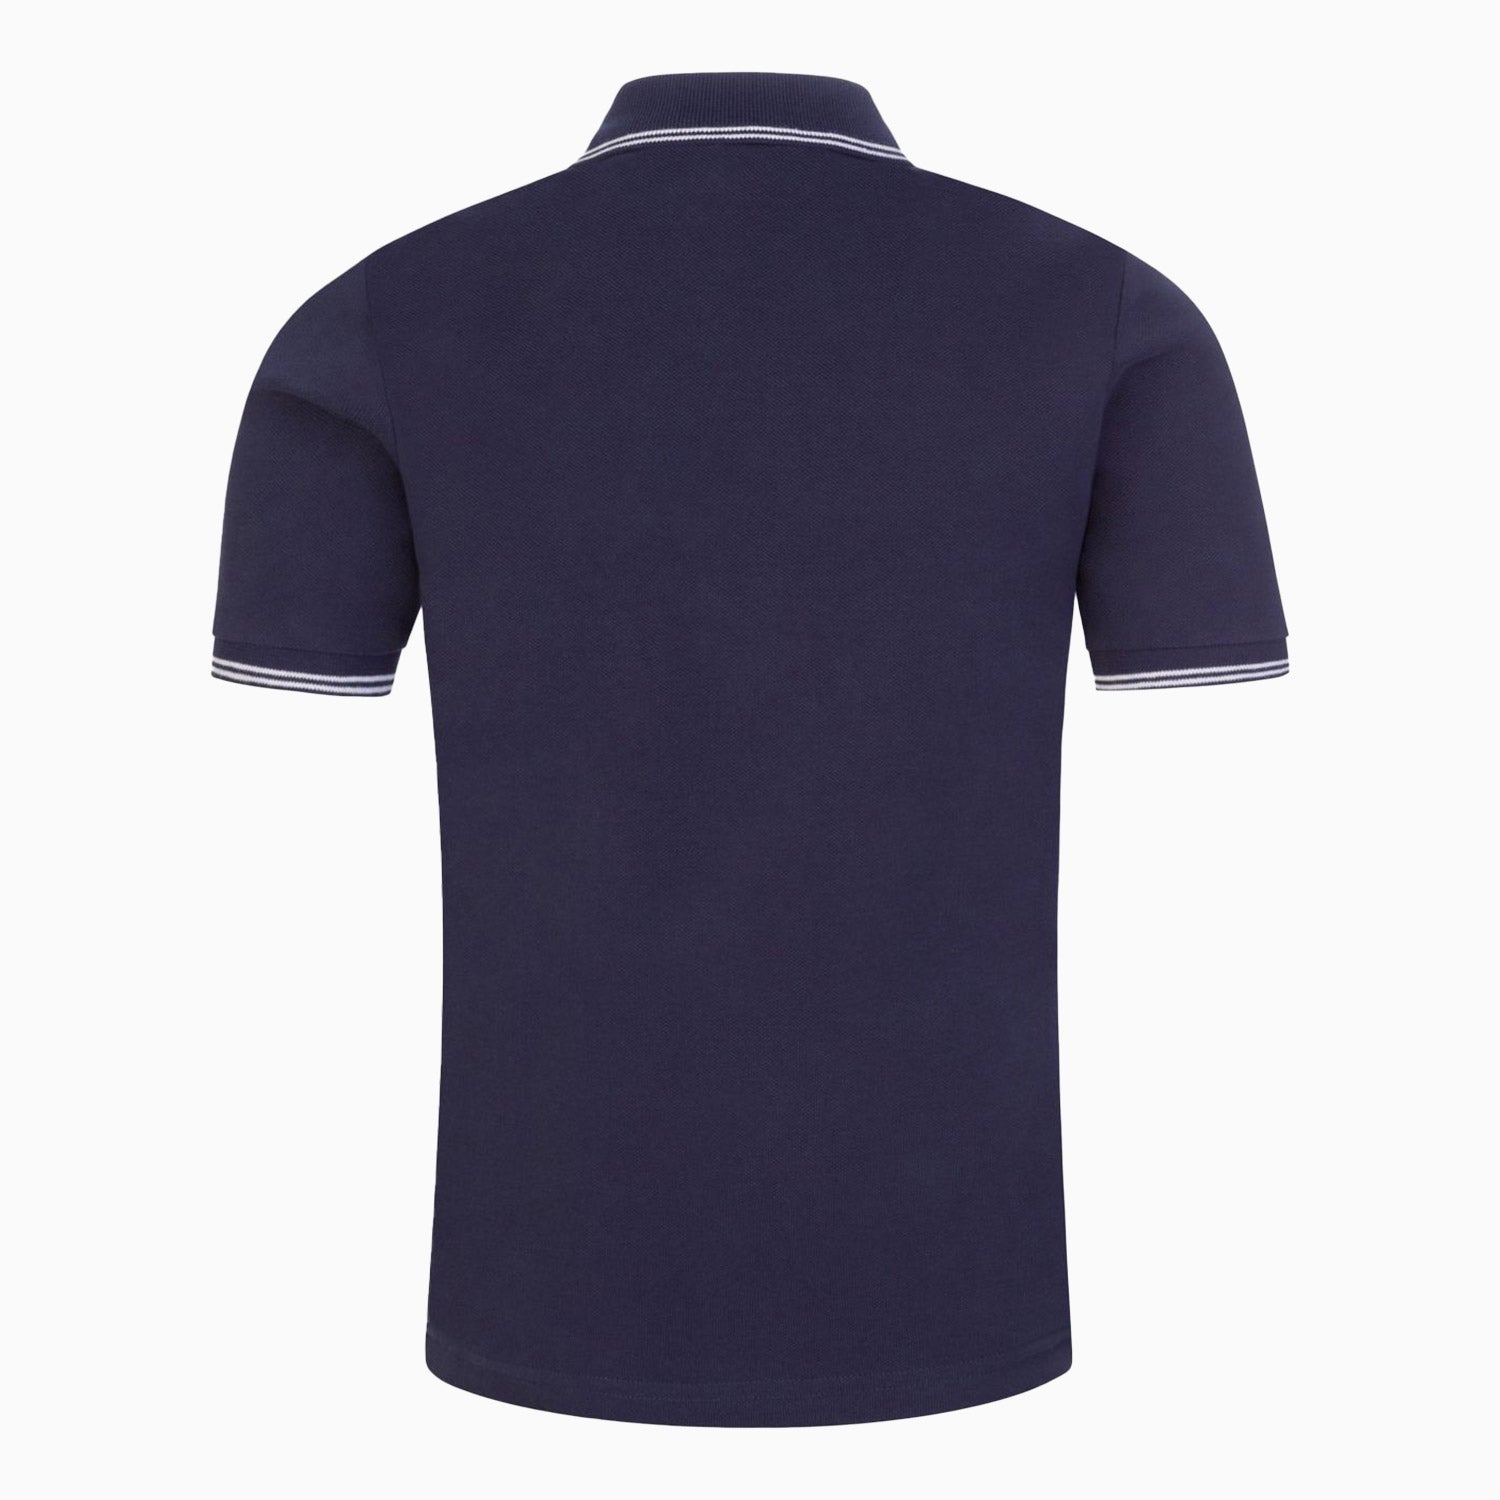 Hugo Boss Kid's Pique Polo T Shirt - Color: Navy, White, Yellow, Electric Blue, Green - Kids Premium Clothing -